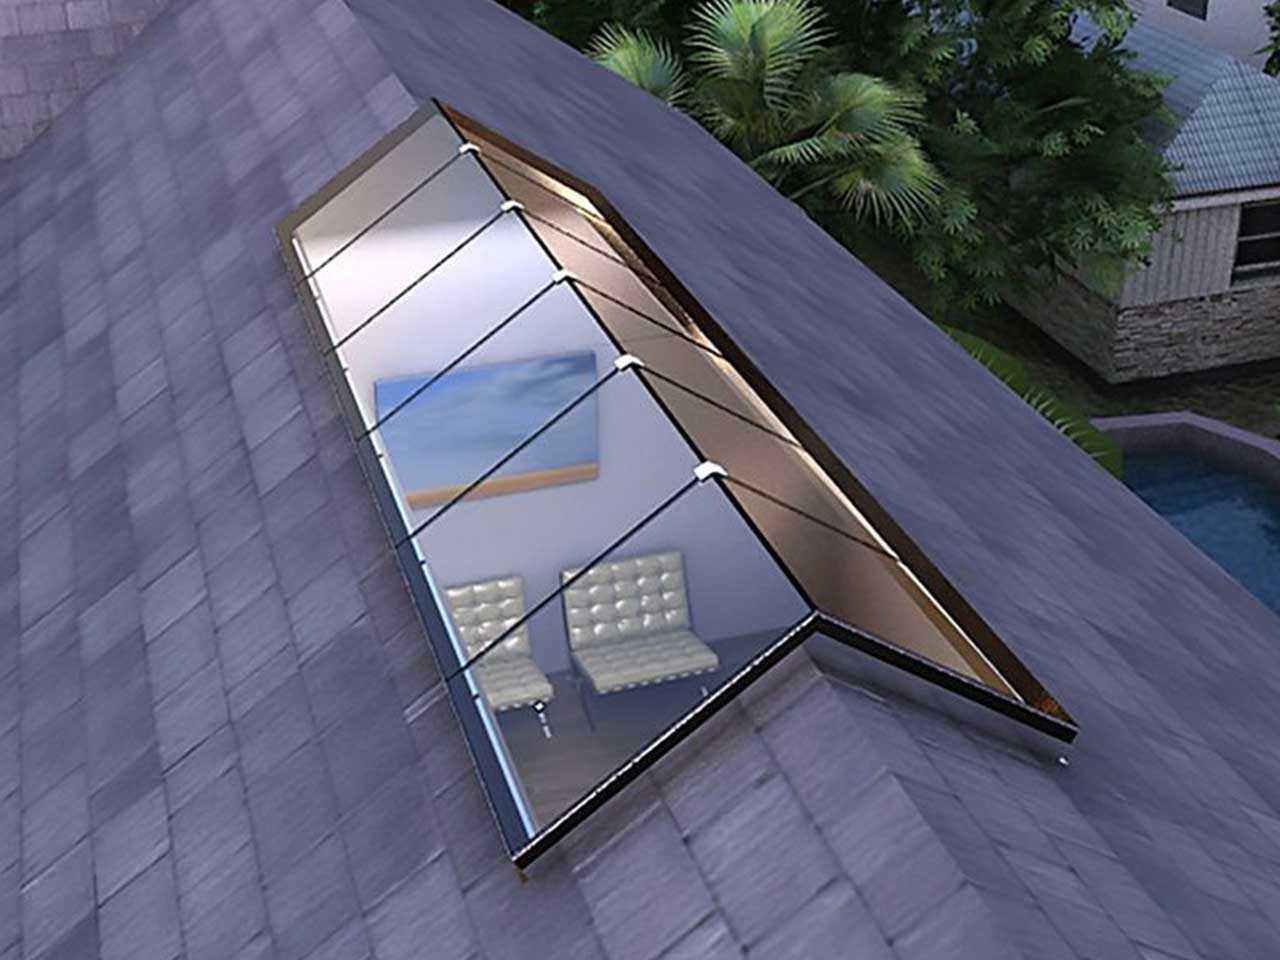 Roof Skylight Manufacturers & Suppliers In in Kochi